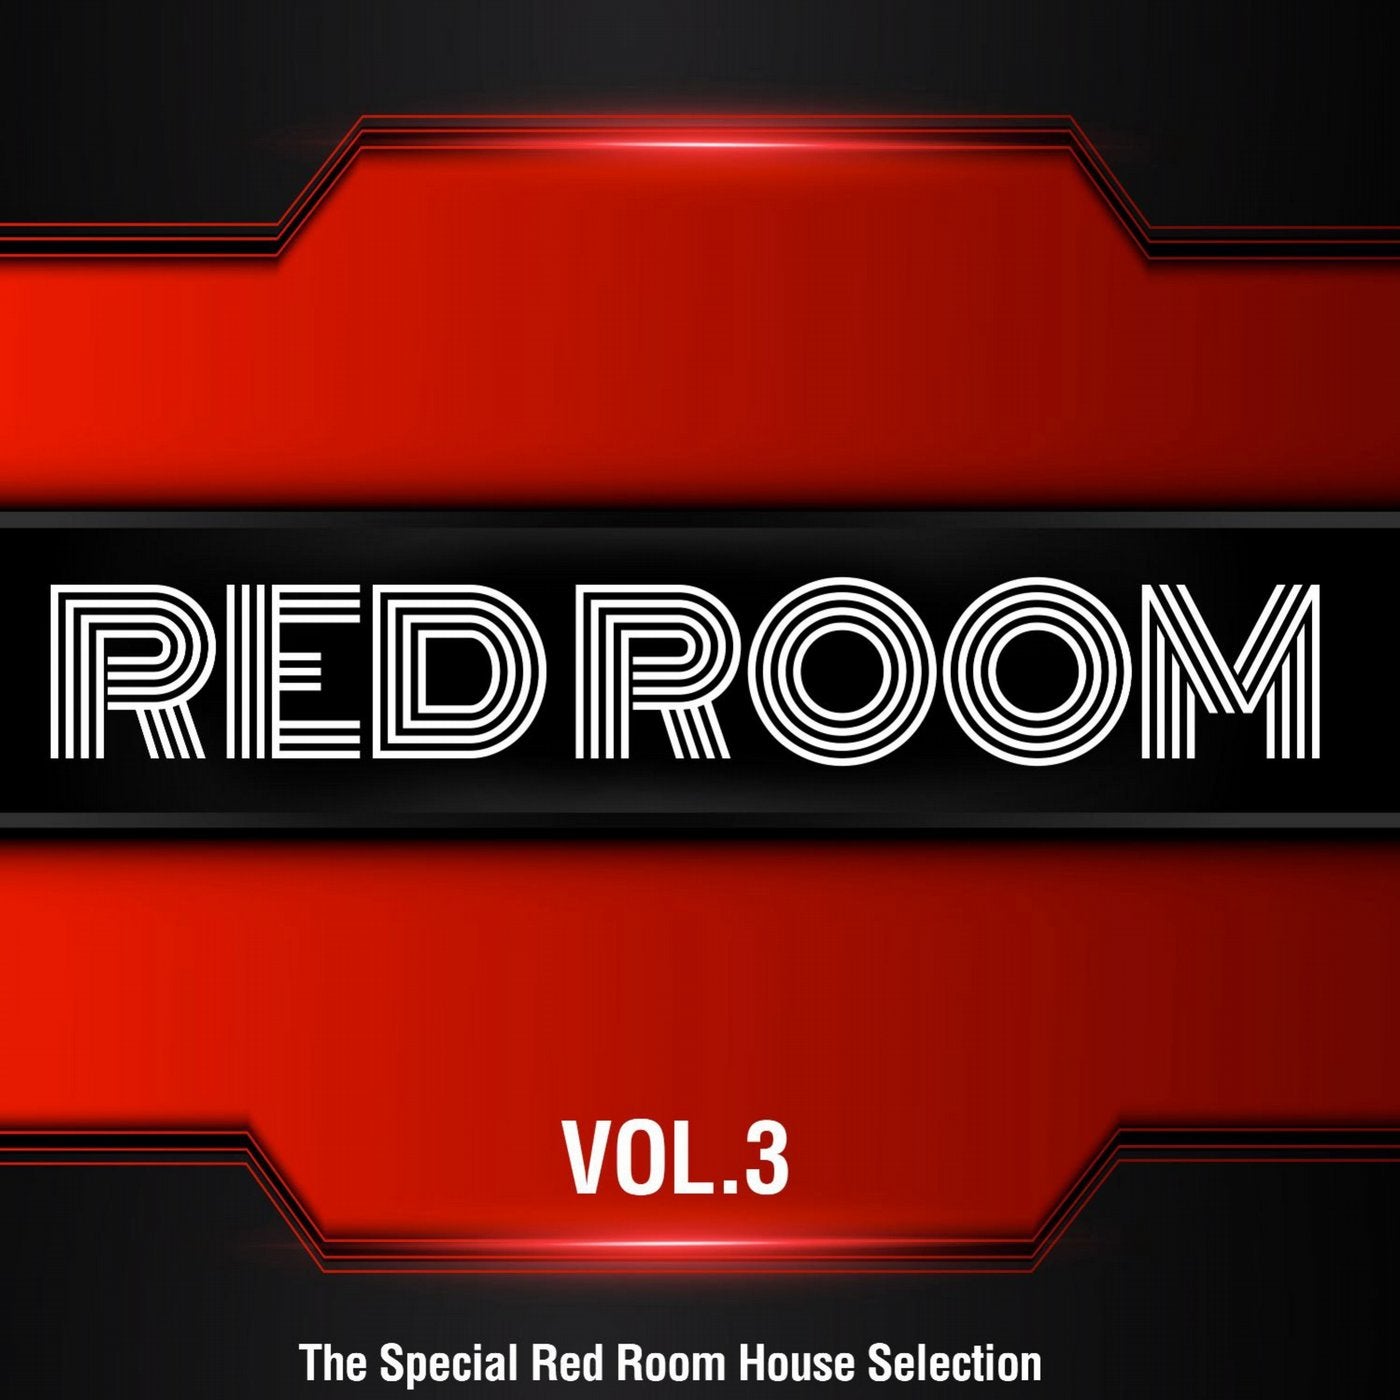 Red Room, Vol. 3 (The Special Red Room House Selection)